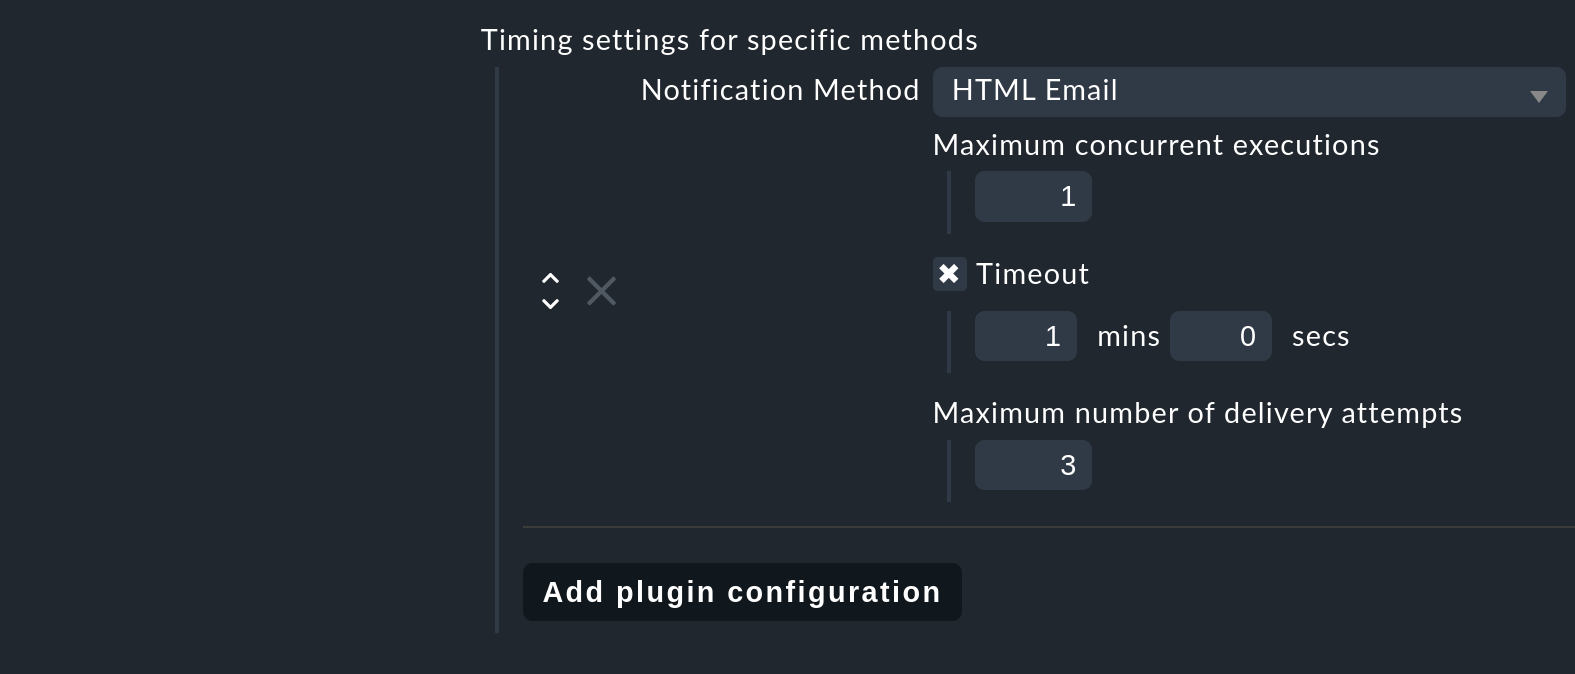 Global timer setting for a notification method.